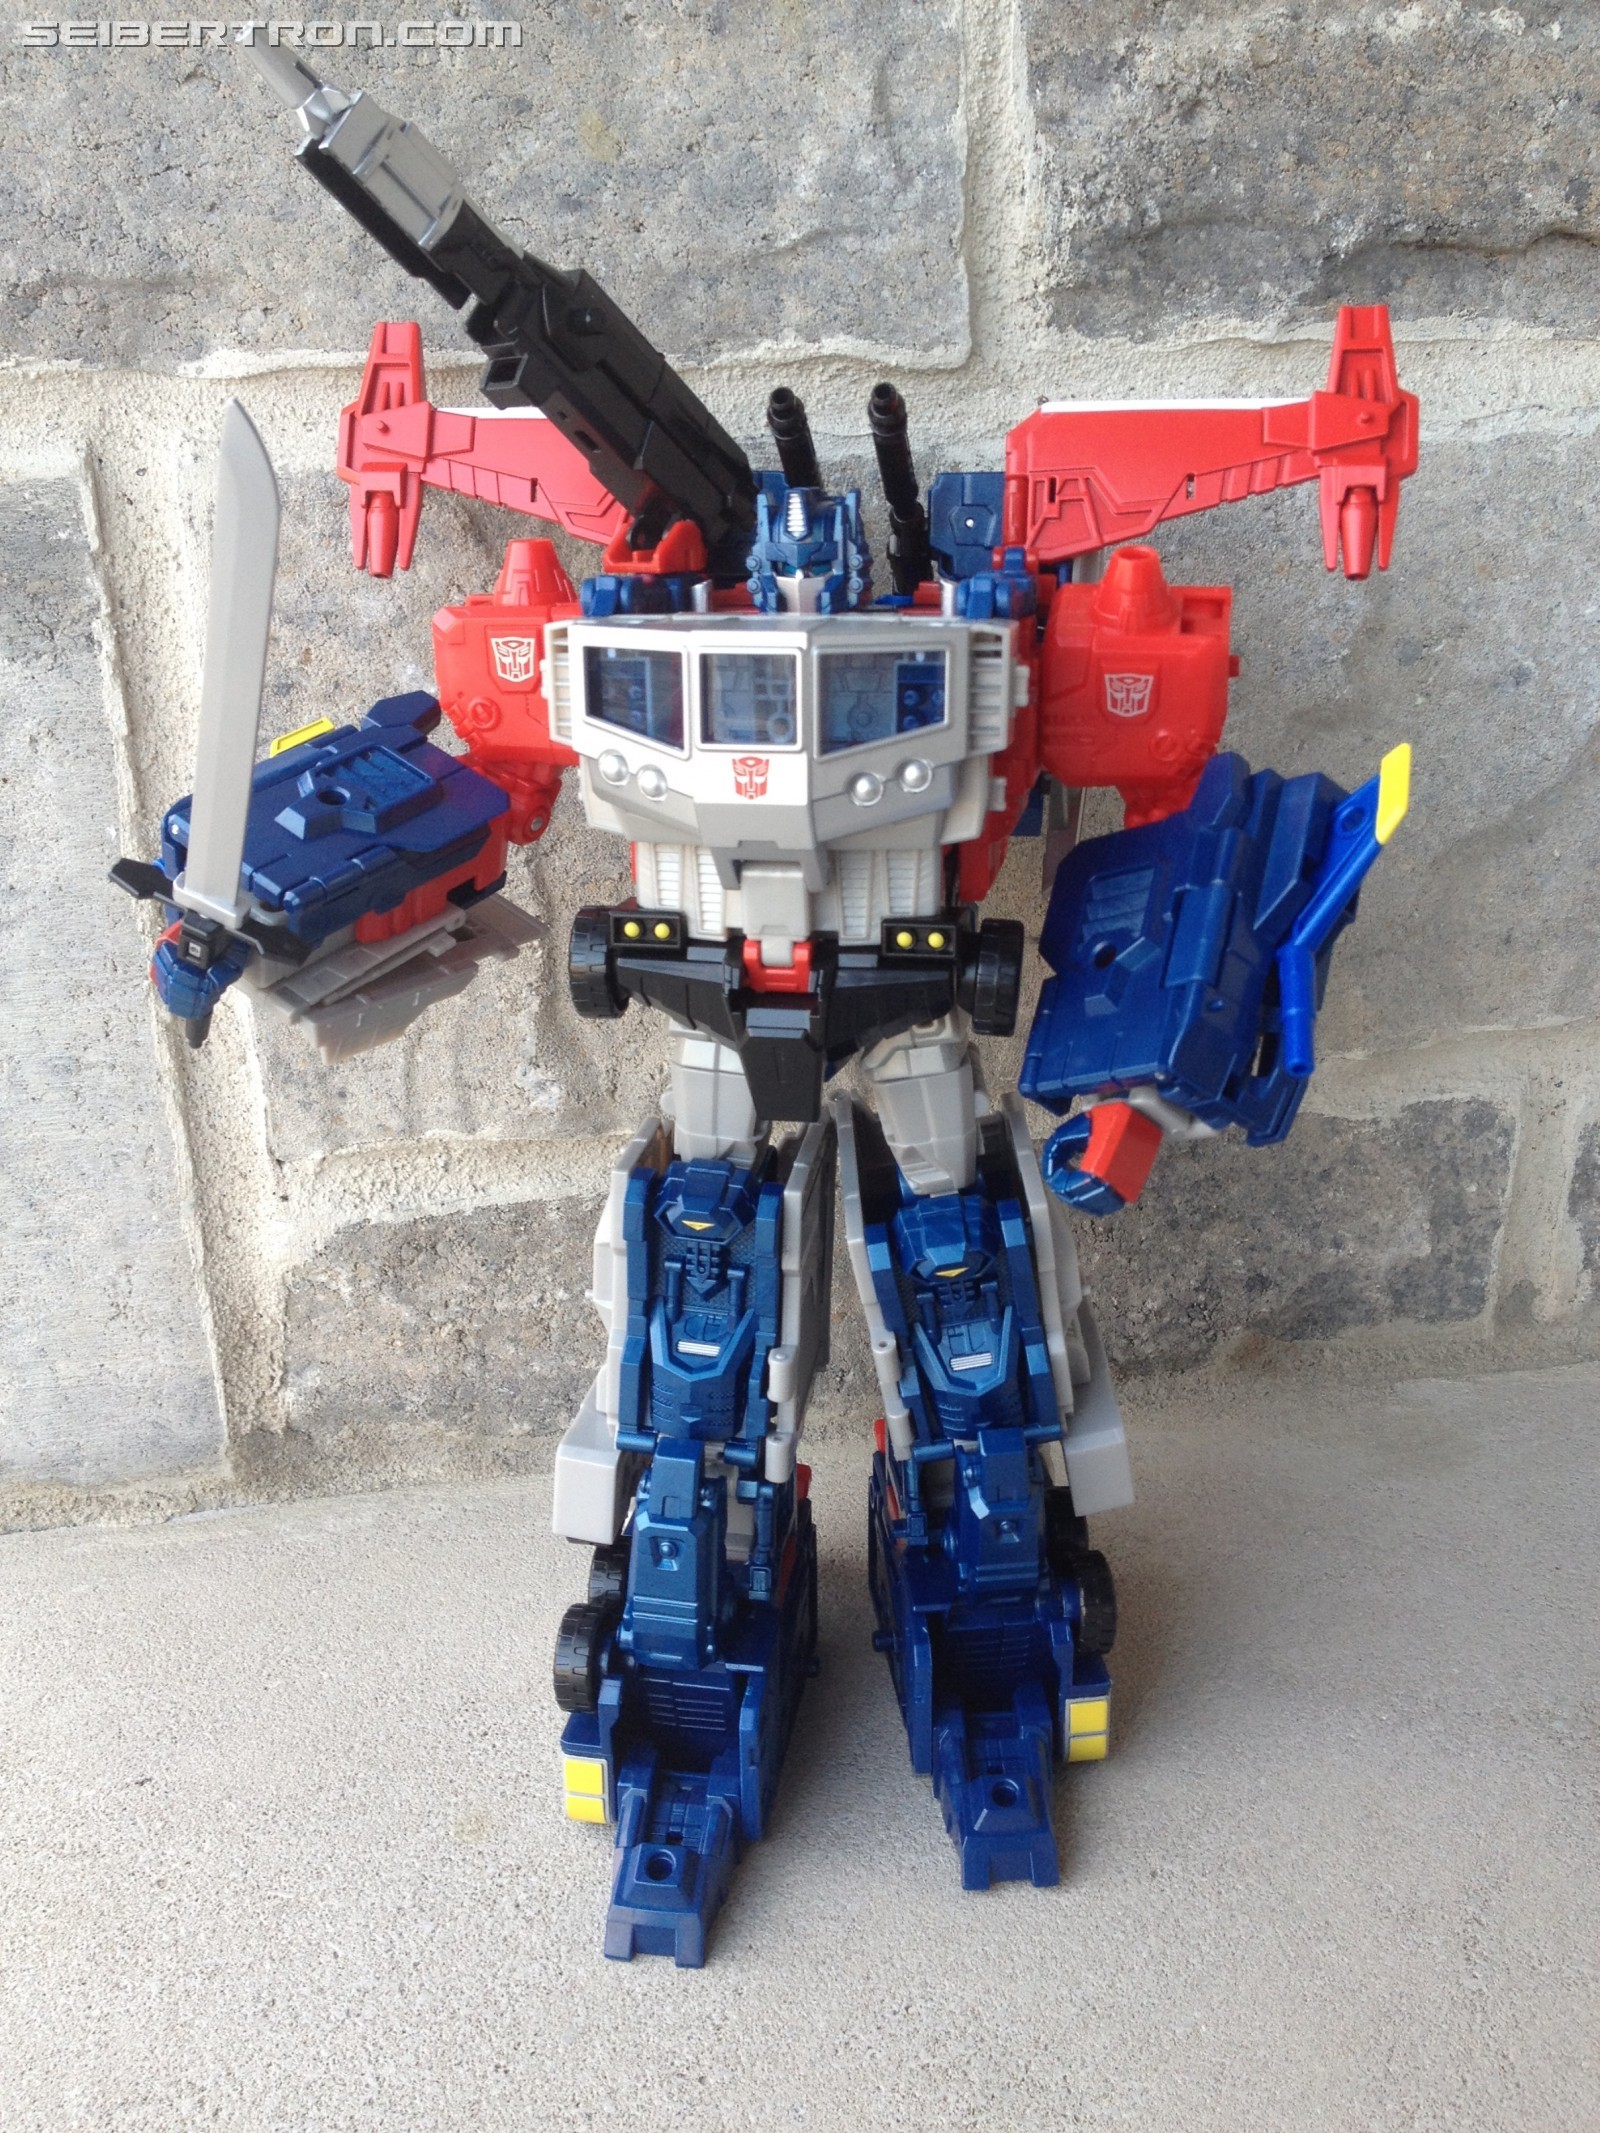 Transformers News: First Images of Hasbro Transformers Titans ReturnMagnus Prime Combined with Takara Legends Godbomber